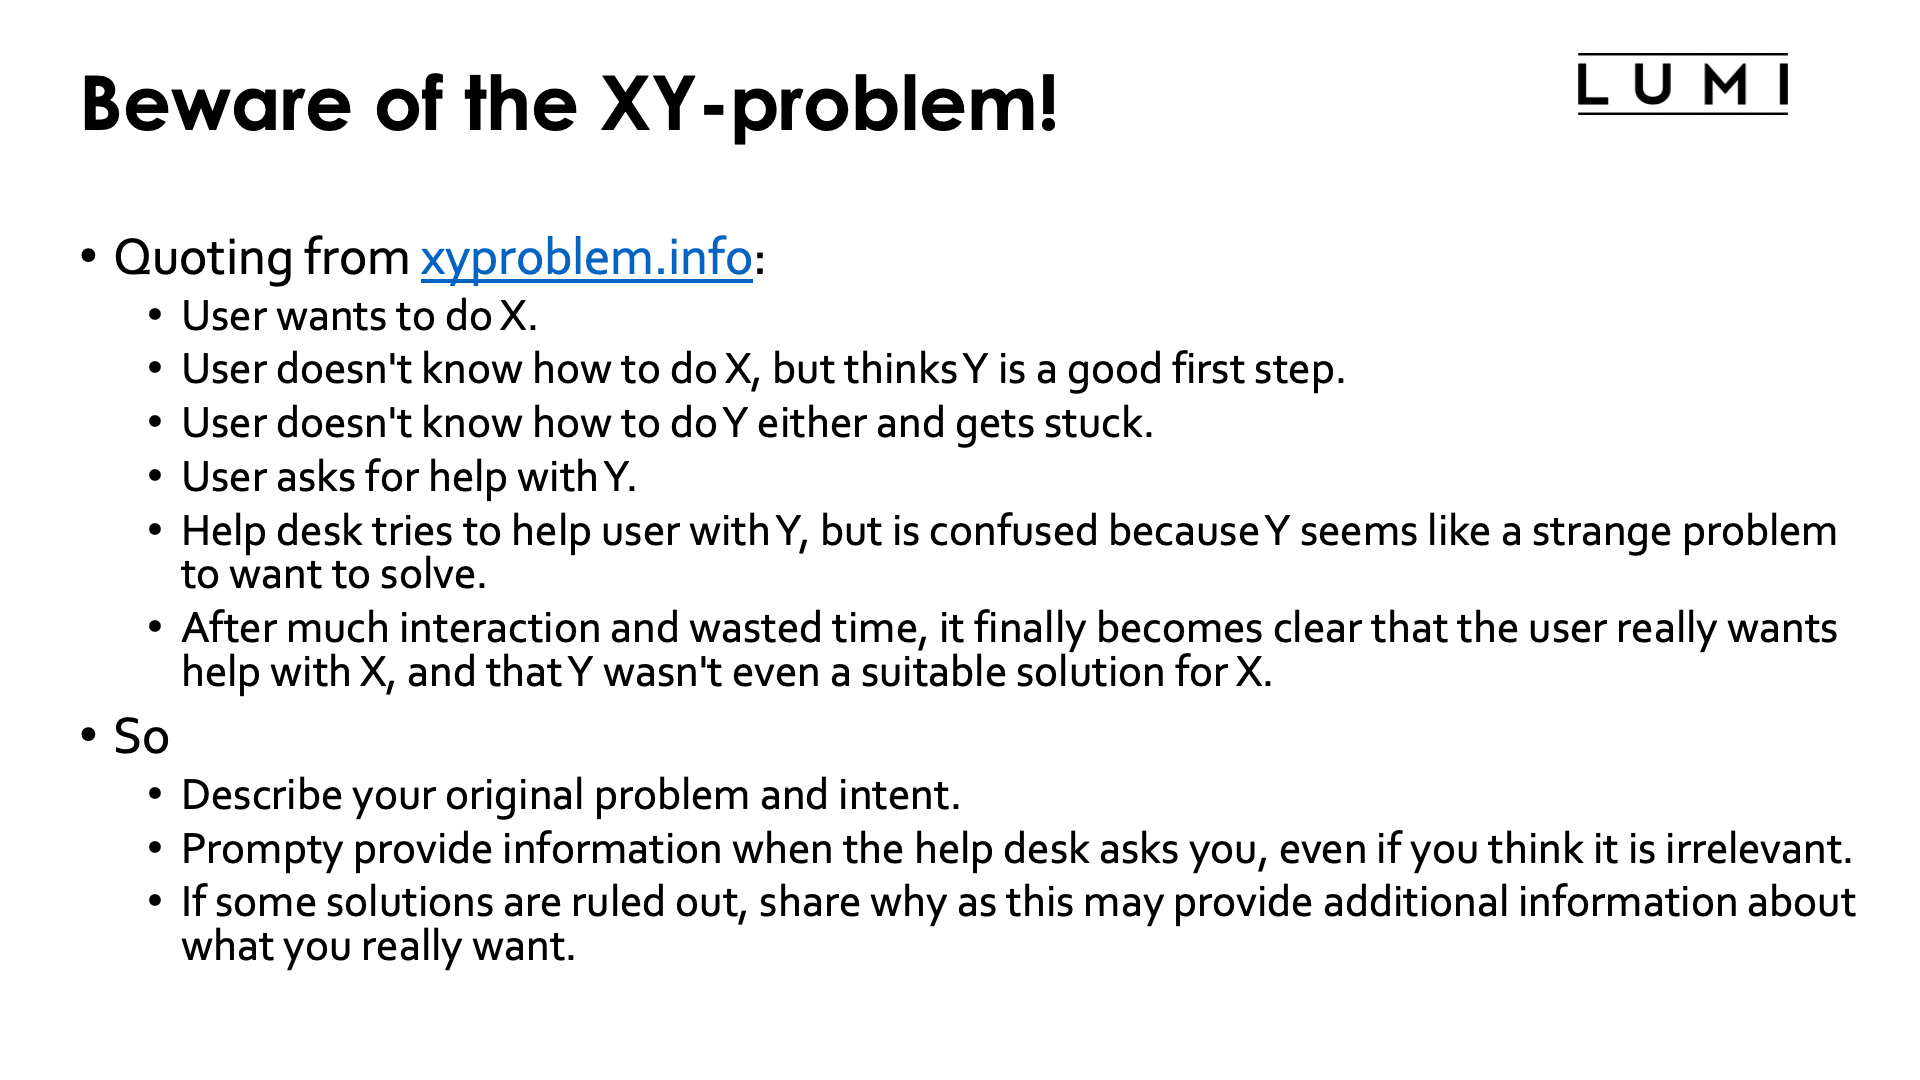 Beware of the XY-problem